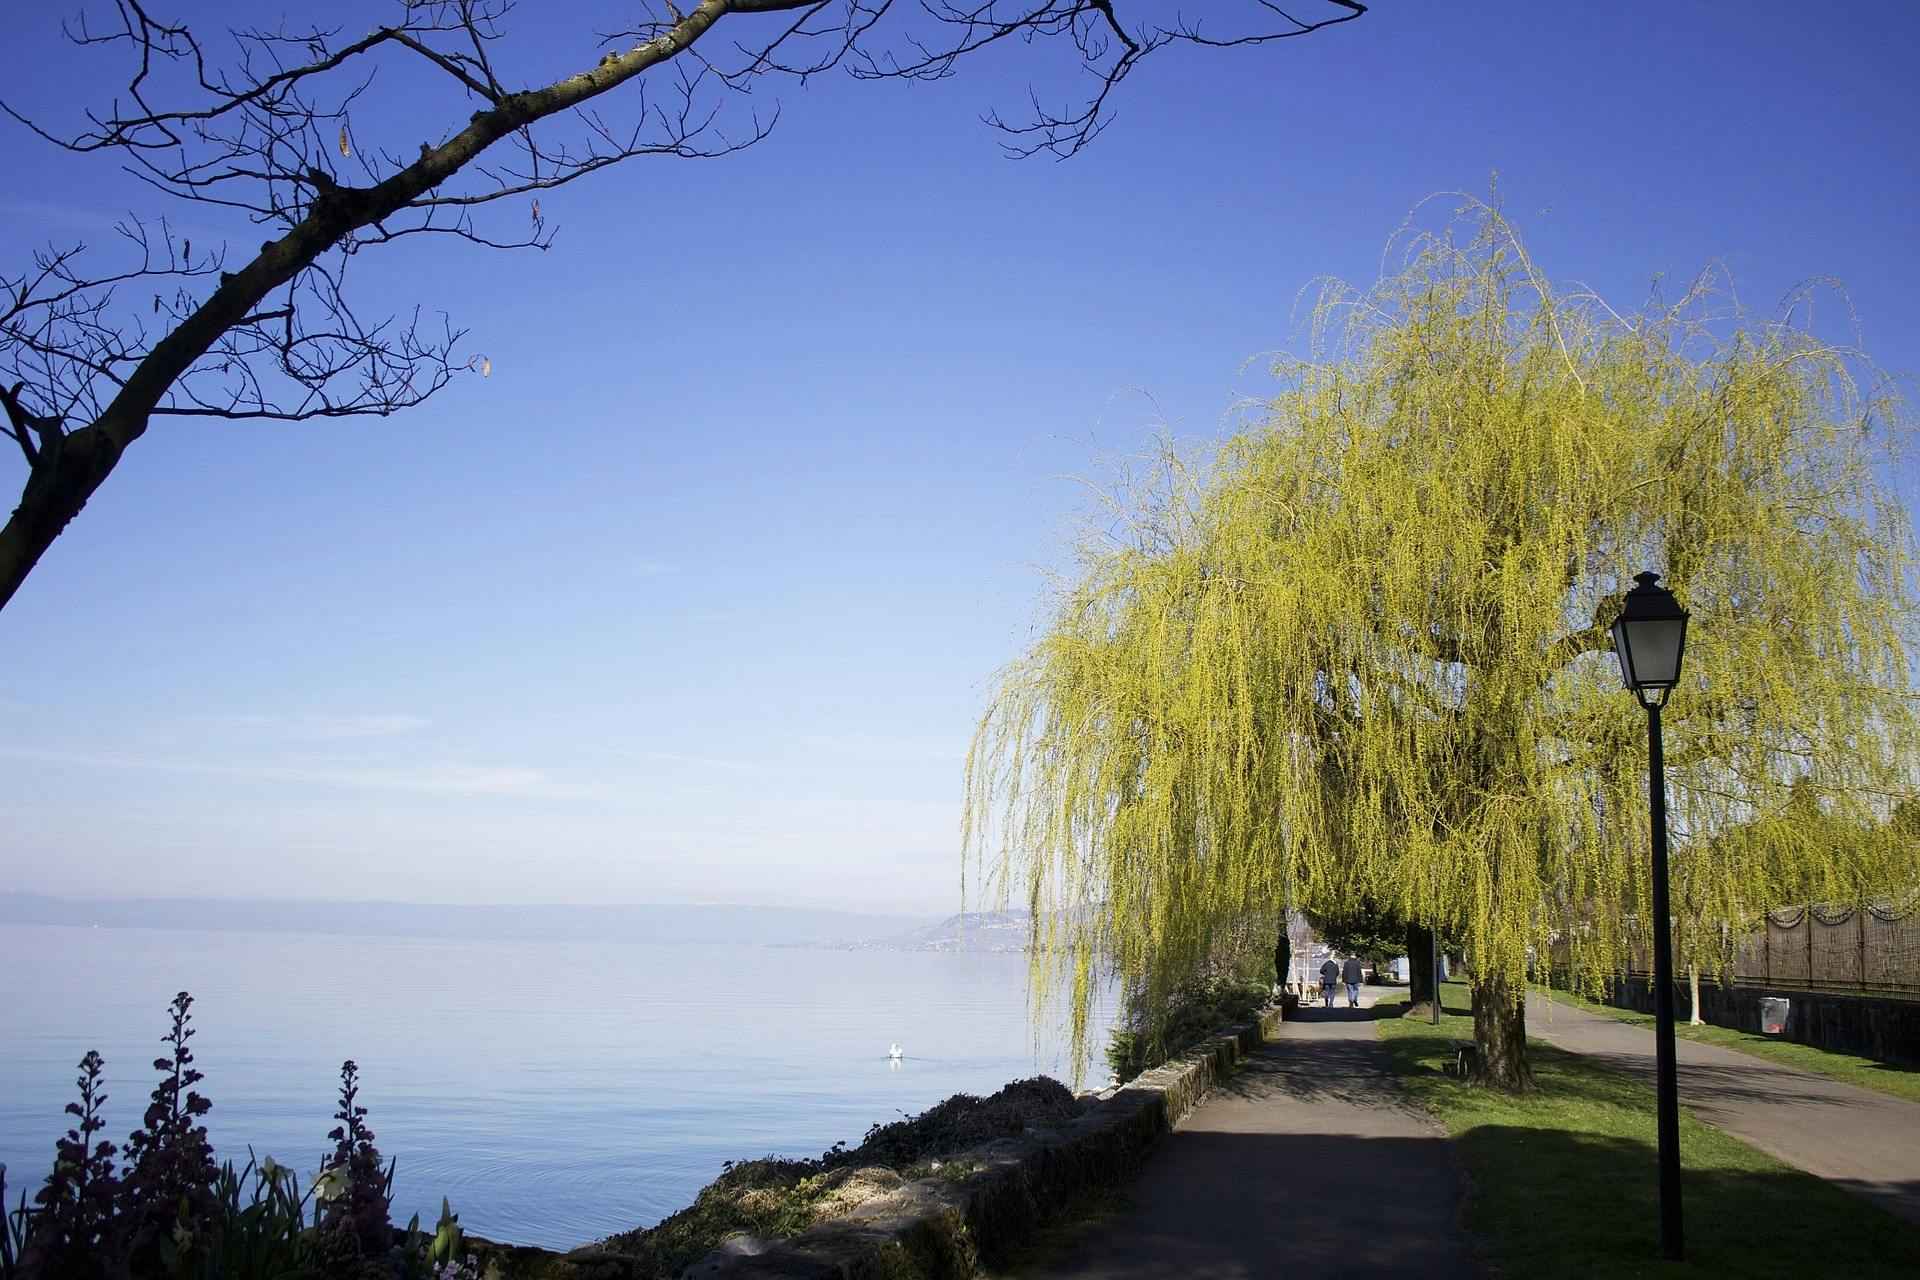 Tour of the instagrammable spots Montreux with a local Musement